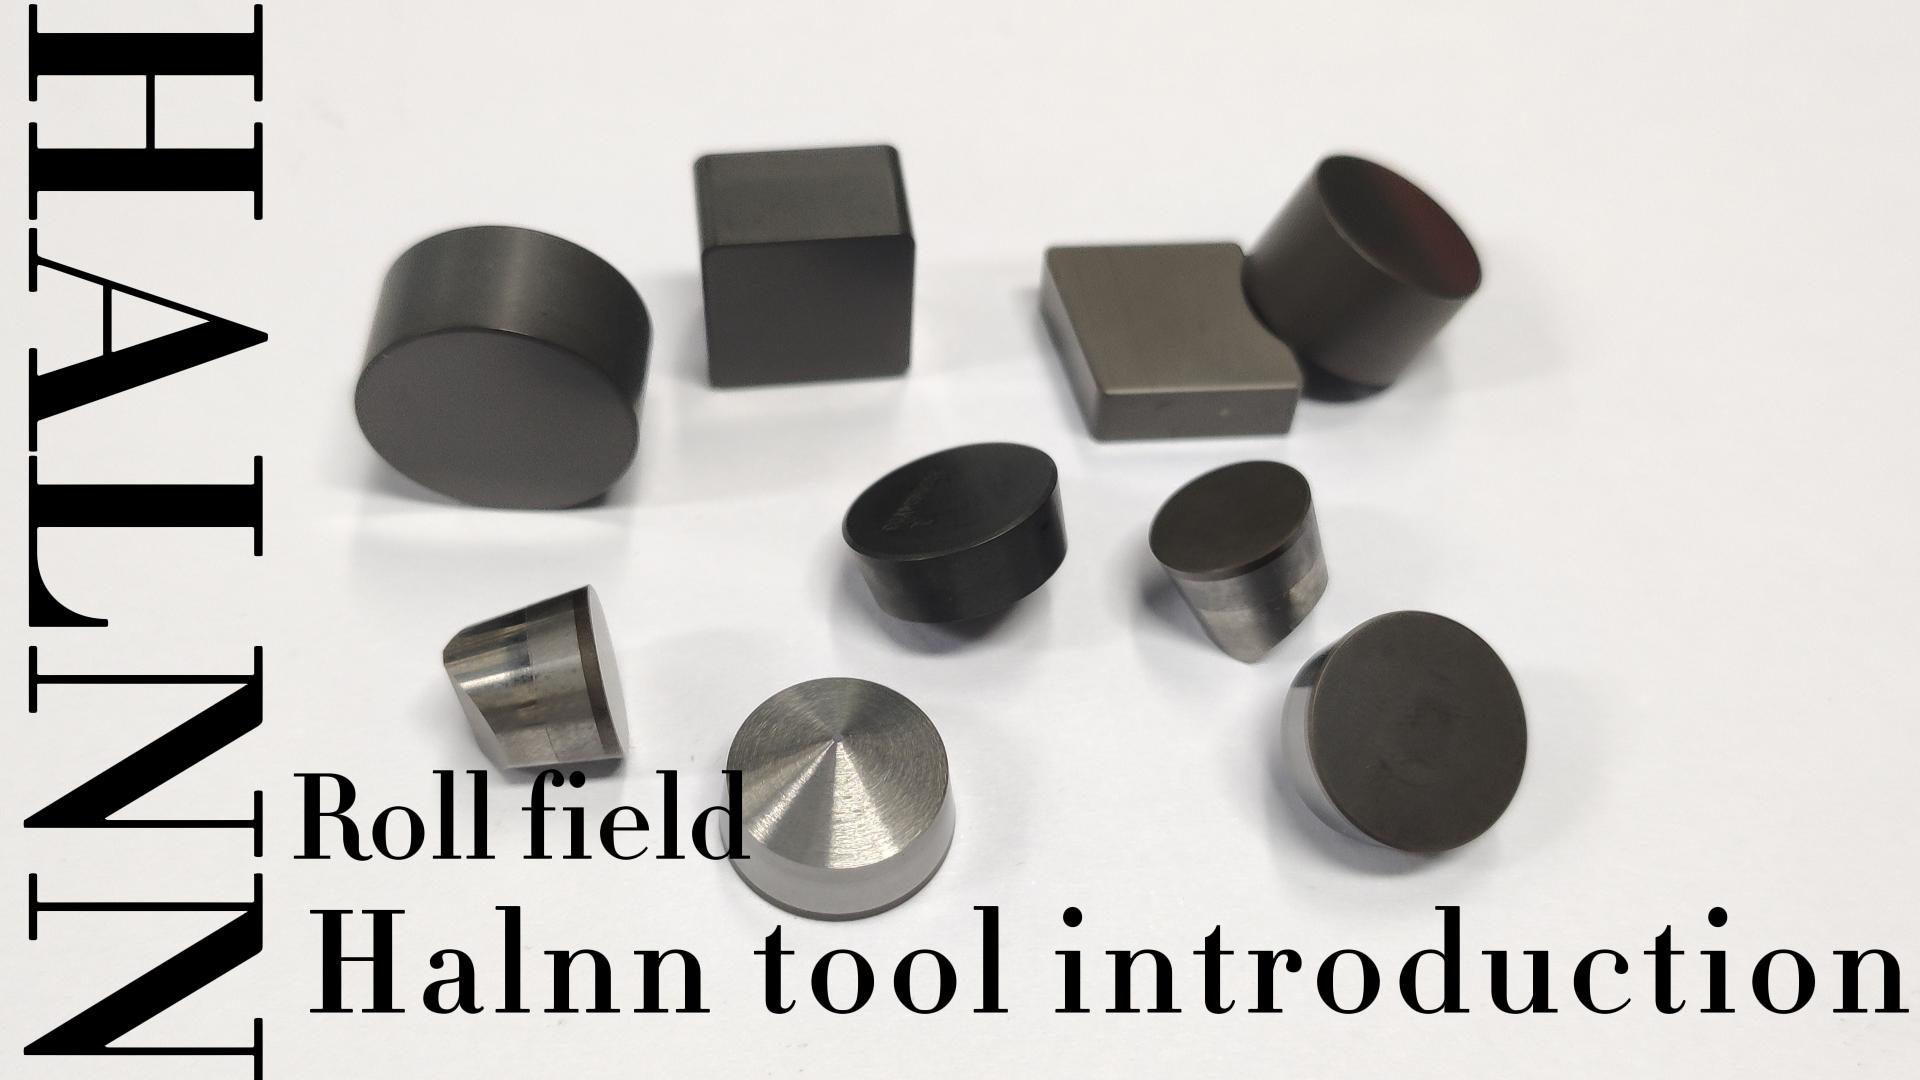 Details of Halnn CBN/PCD inserts for roll machining